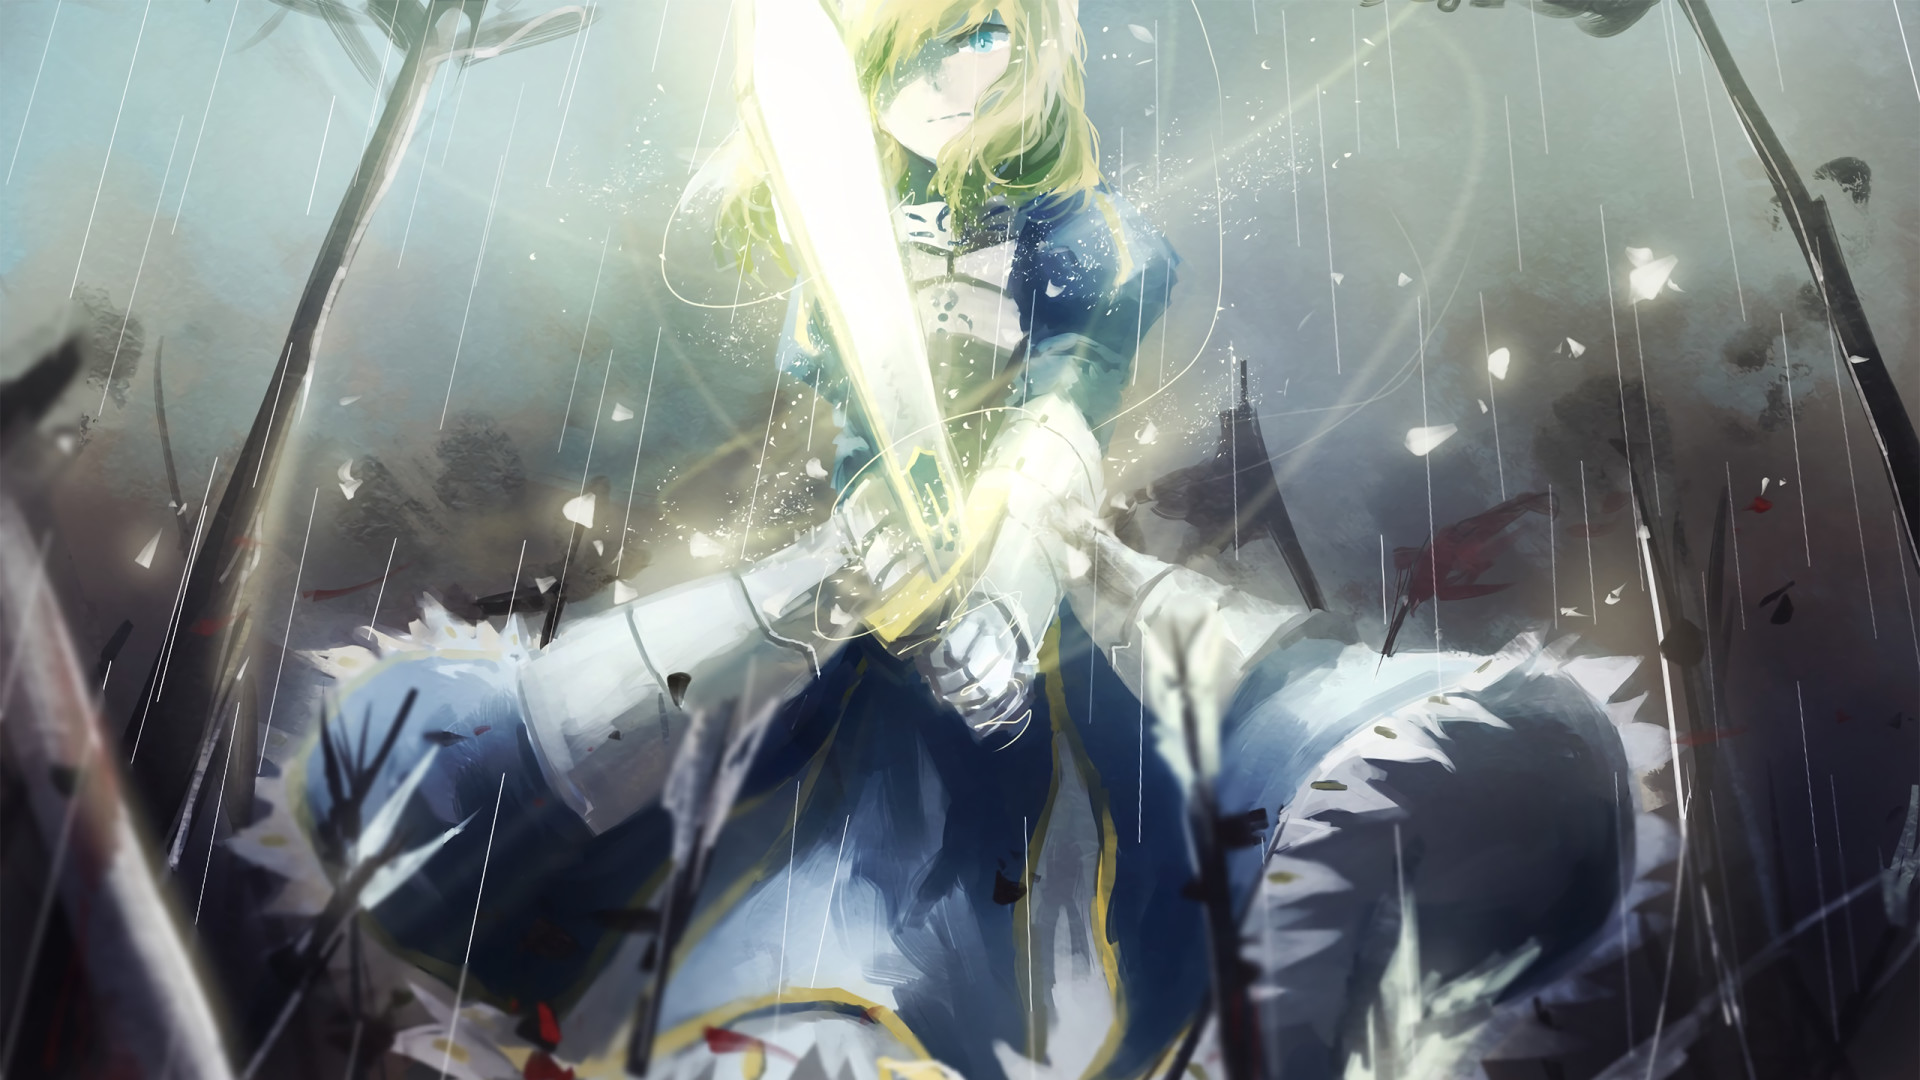 1920x1080 Anime Fate/Stay Night Saber (Fate Series) Wallpaper